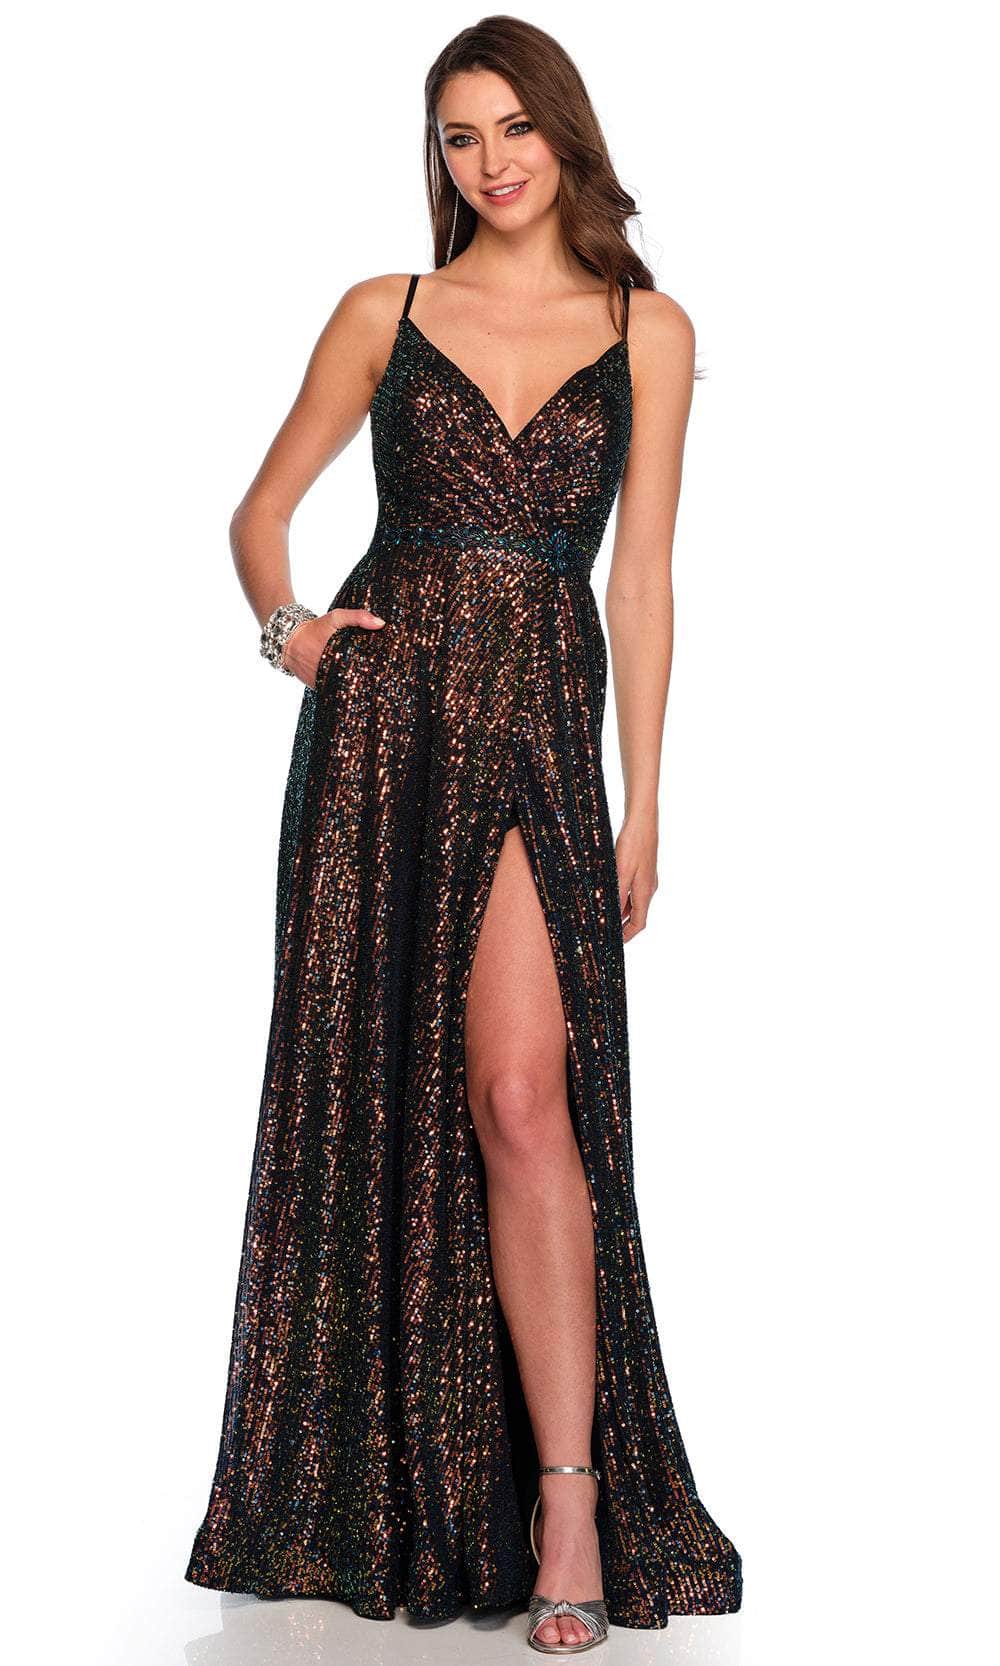 Image of Dave & Johnny 11278 - Surplice V-Neck Iridescent Prom Gown